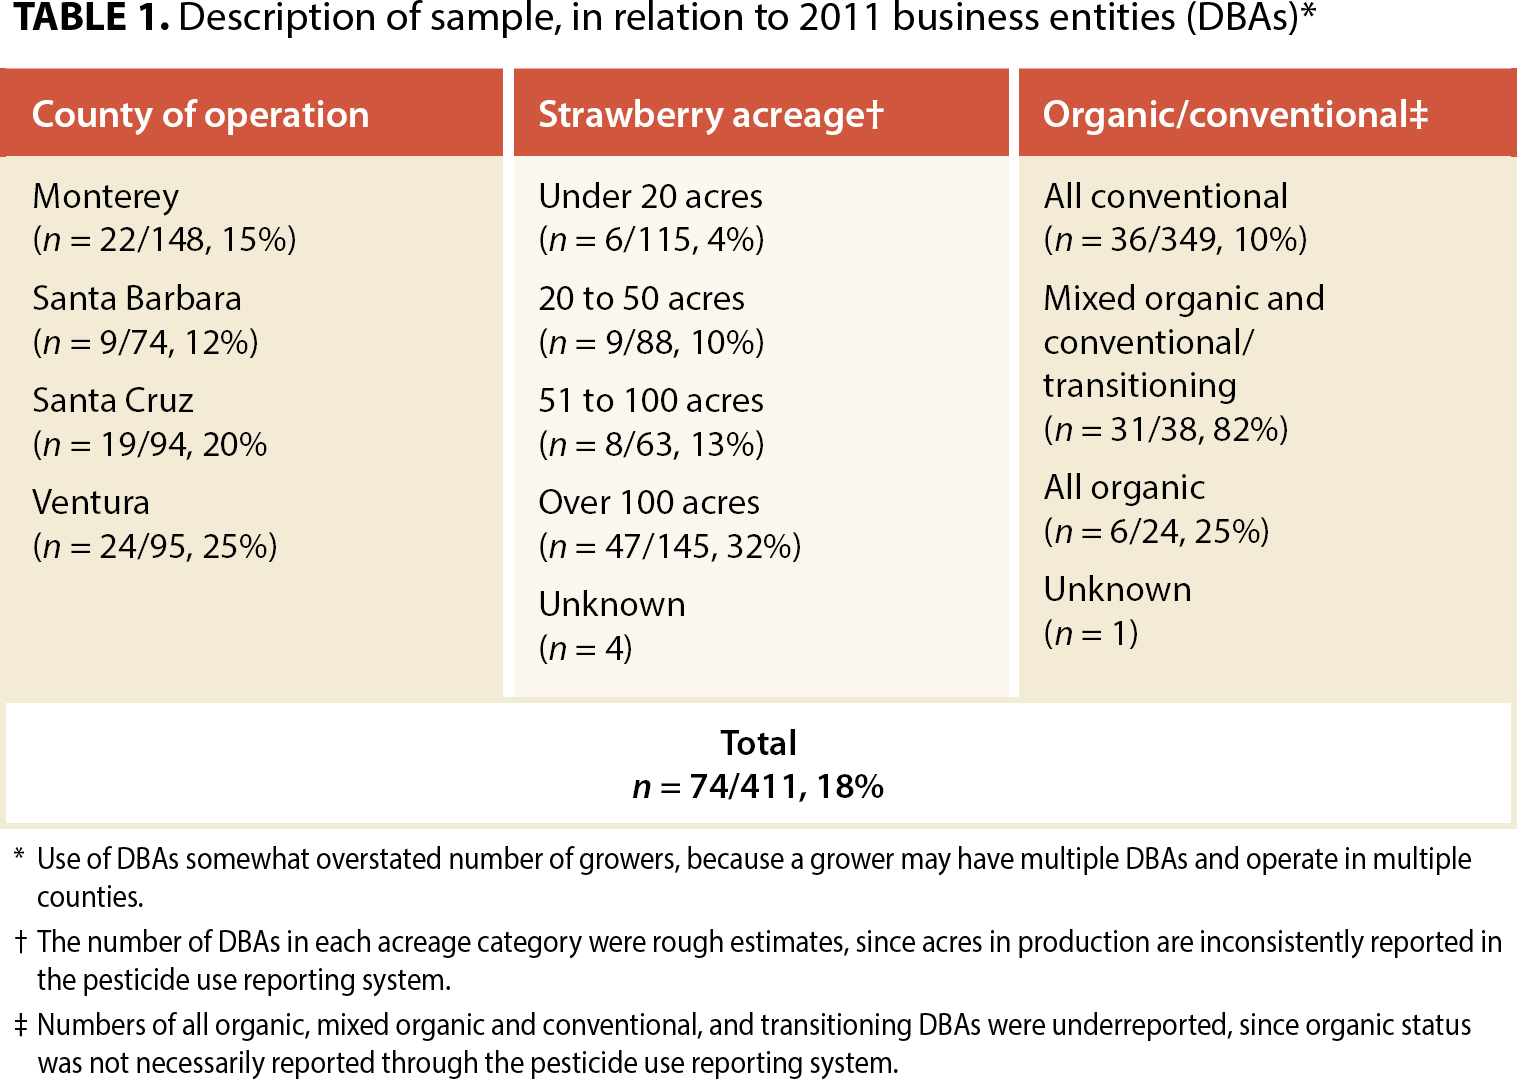 Description of sample, in relation to 2011 business entities (DBAs)*